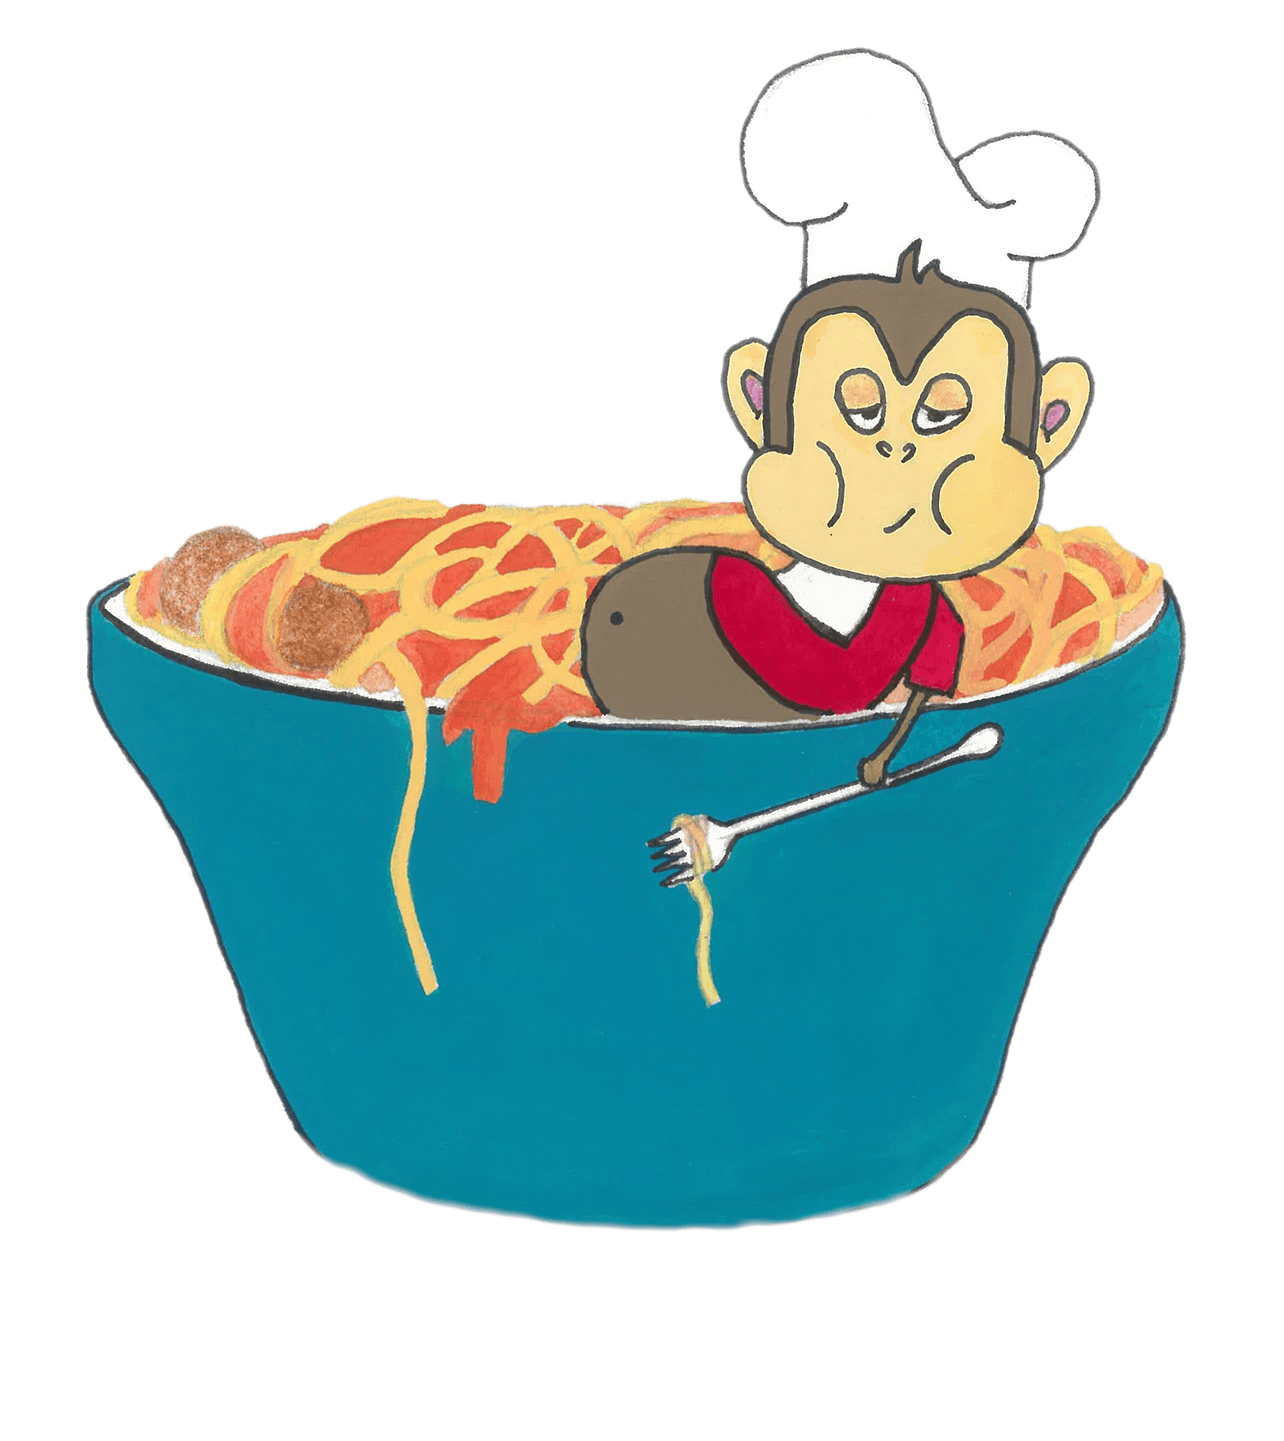 Illustration showing paediatrician lying inside bowl of pasta, looking very full but still eating